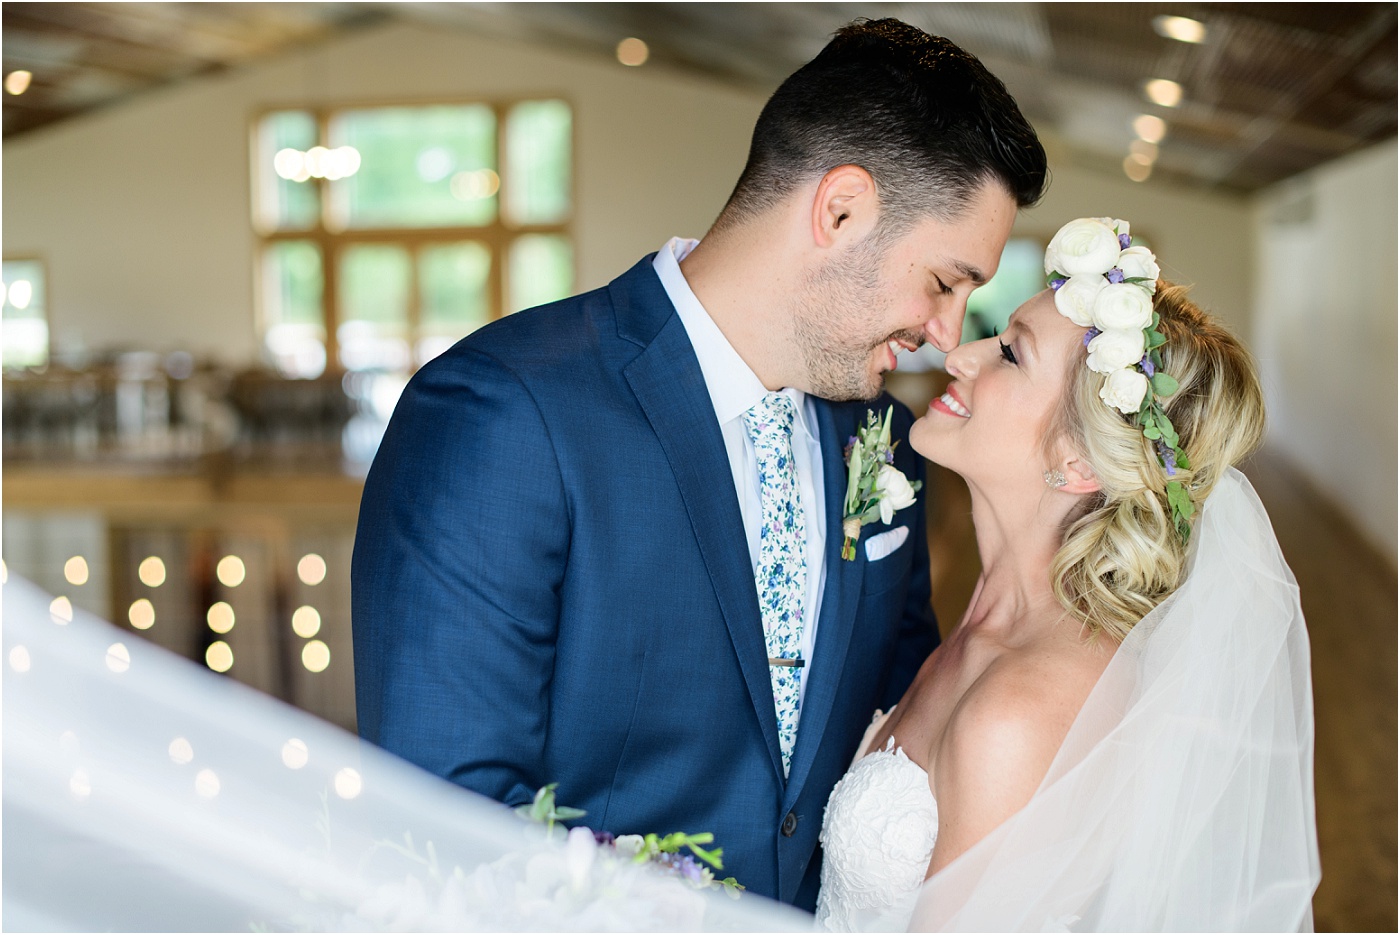 Carper Winery Wedding | Groom with navy tuxedo and Bride with flower crown and strapless wedding dress